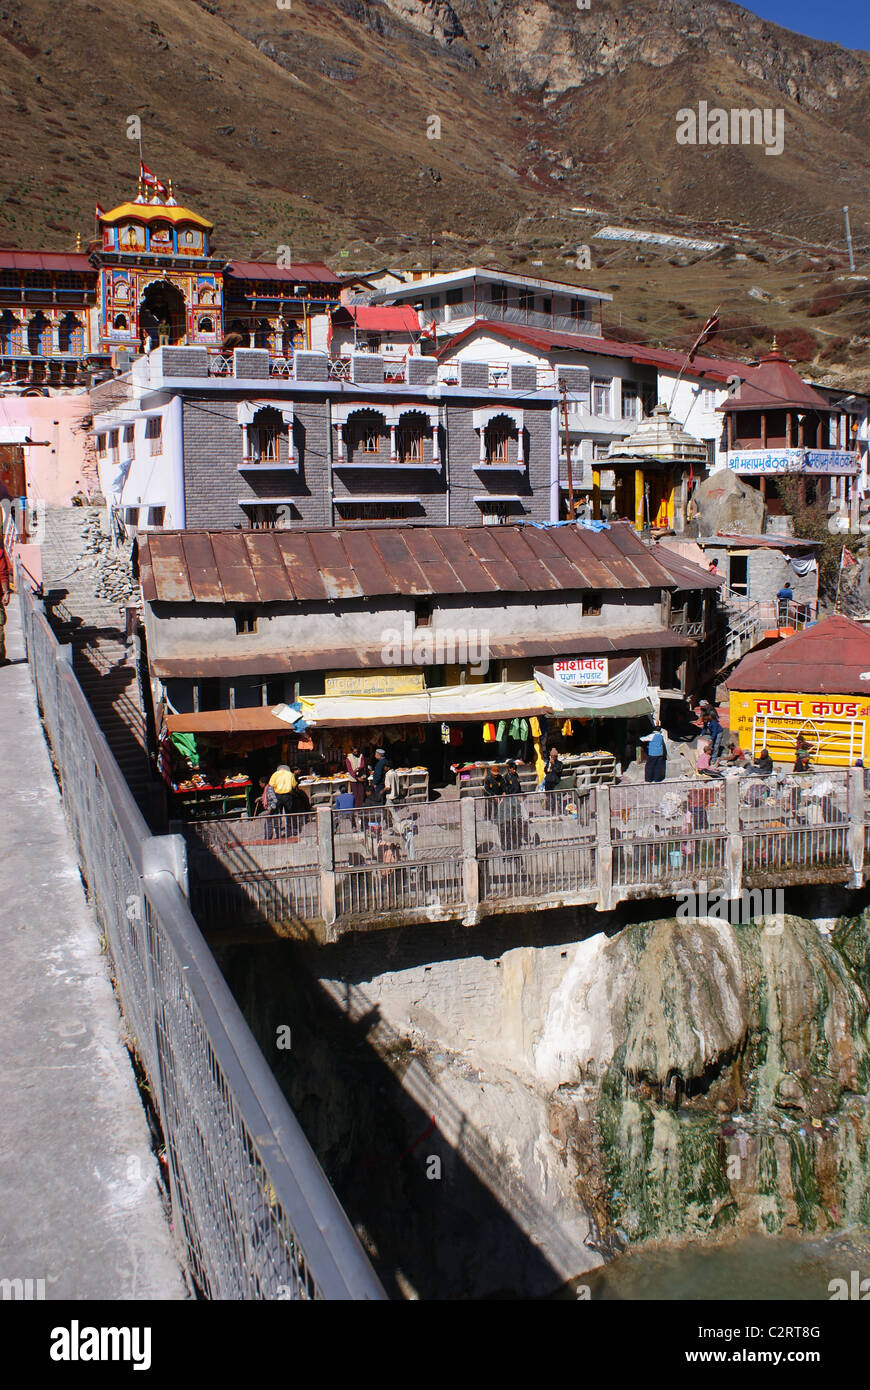 Garhwal Himalayas, India: A view of the Badrinath Temple complext, viewed from a bridge spanning the Alakananda river. Stock Photo